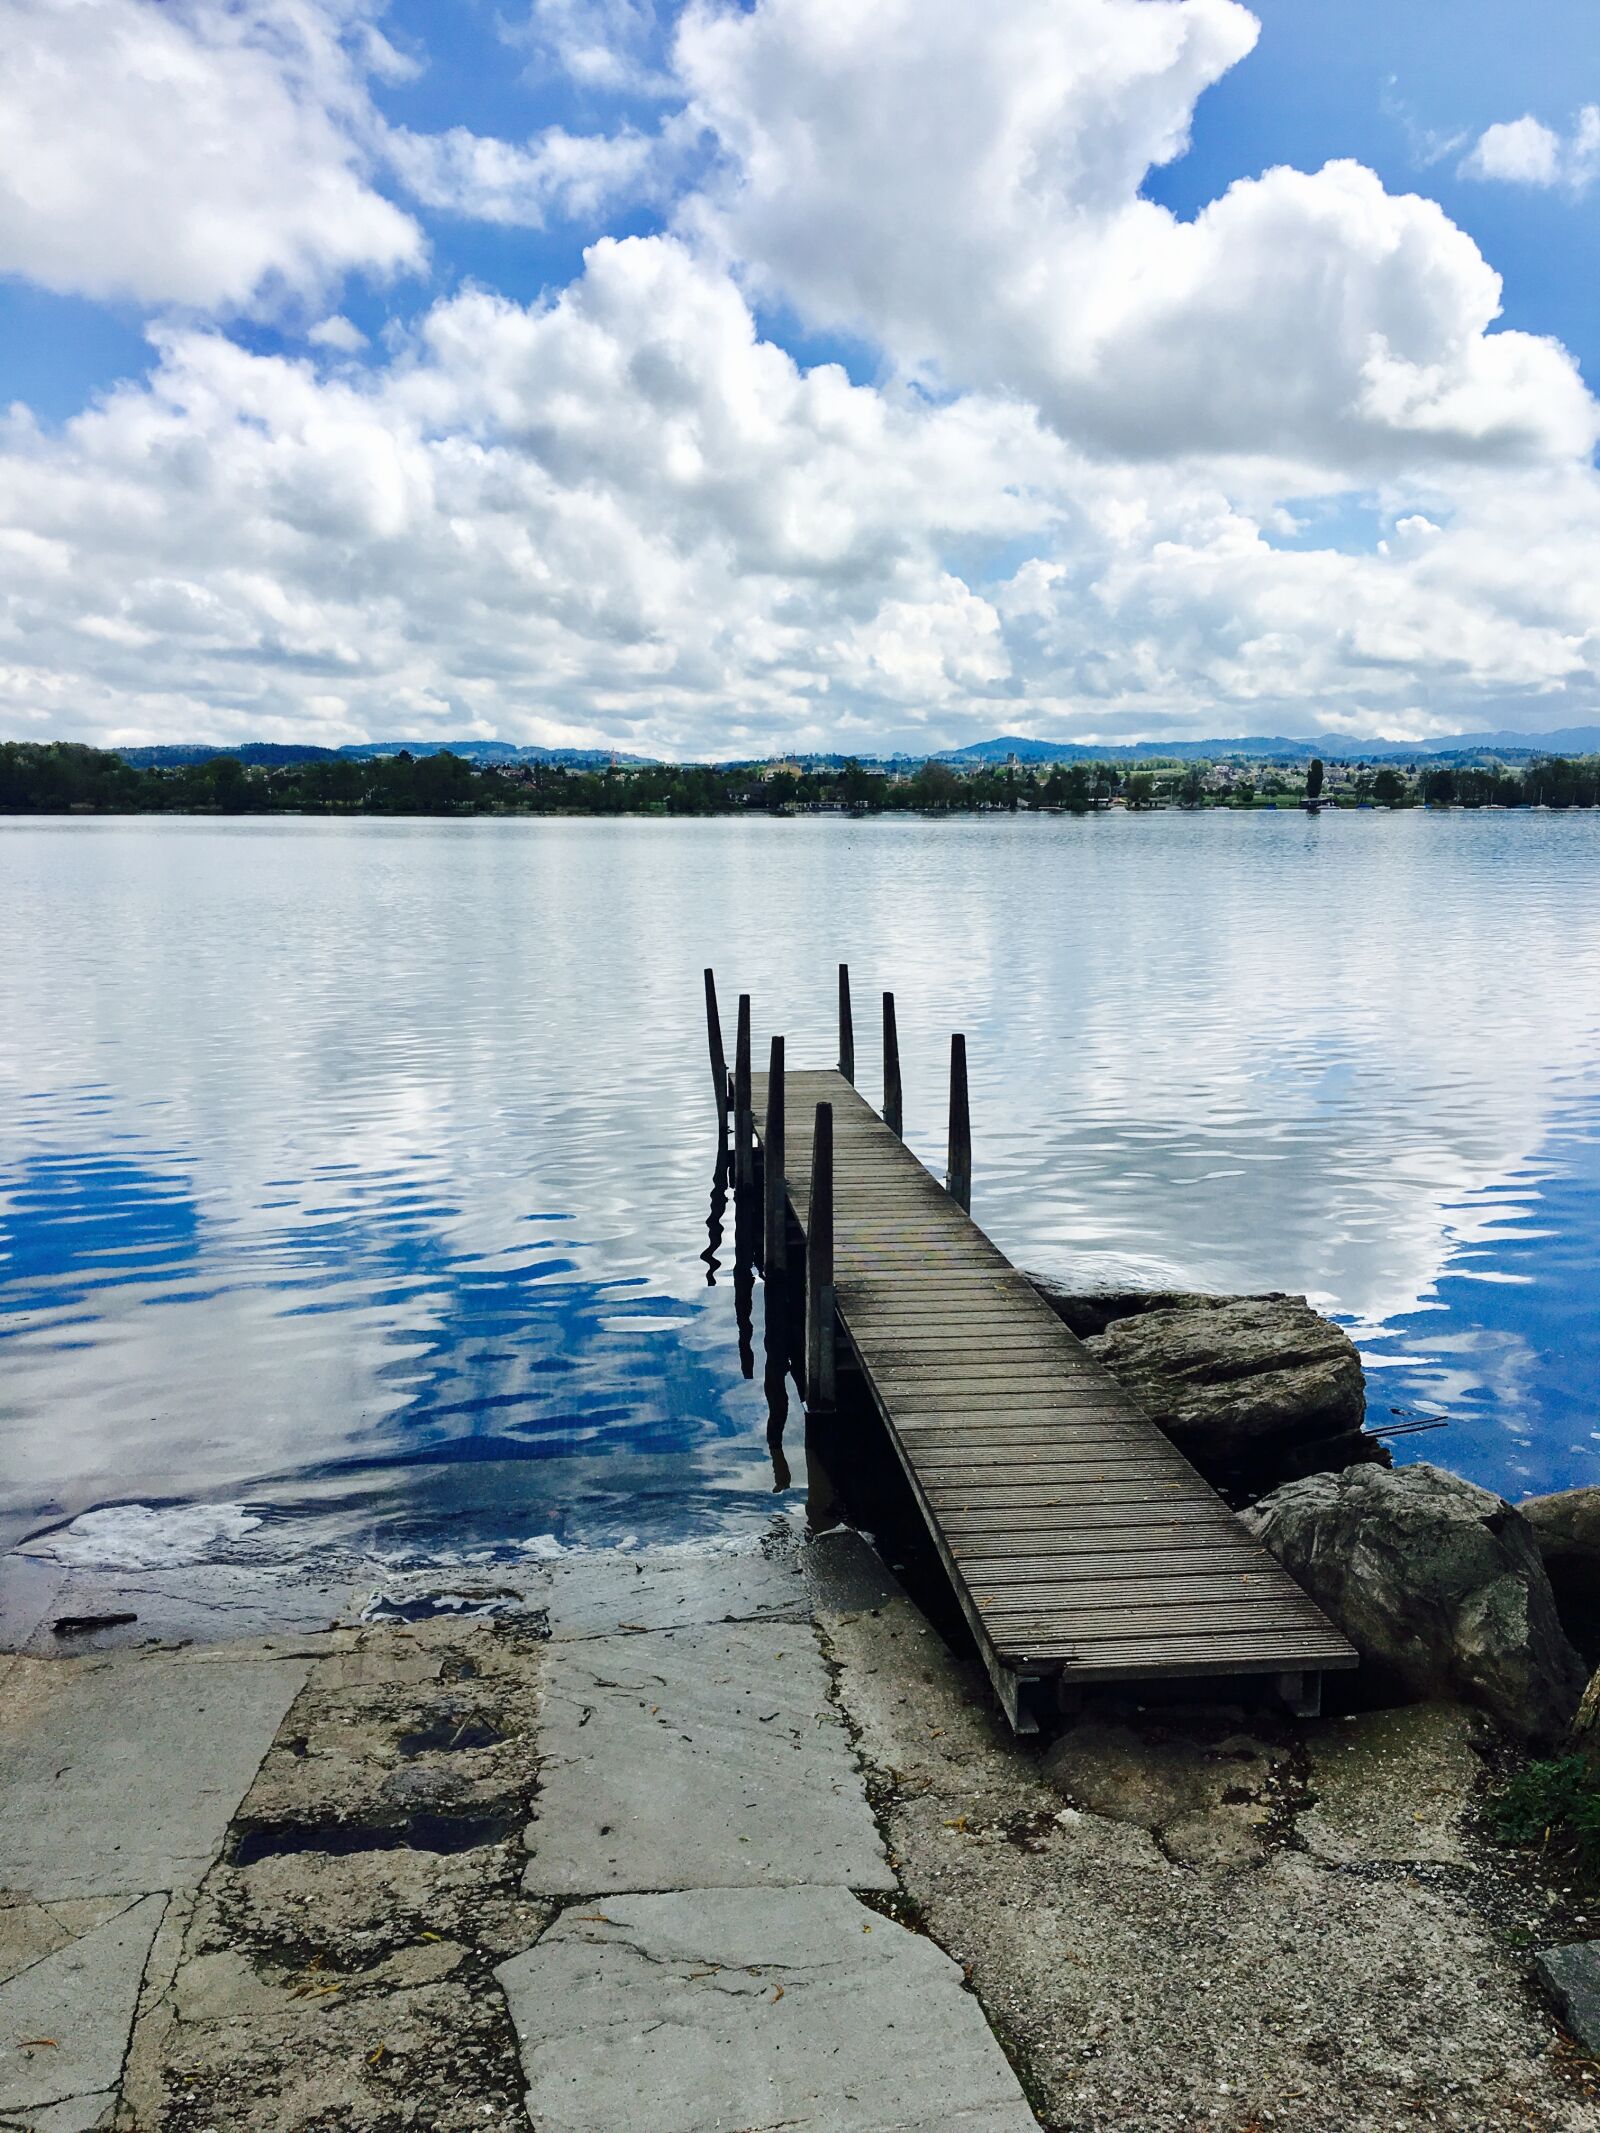 Apple iPhone 6s sample photo. Lake, zurich, canton photography